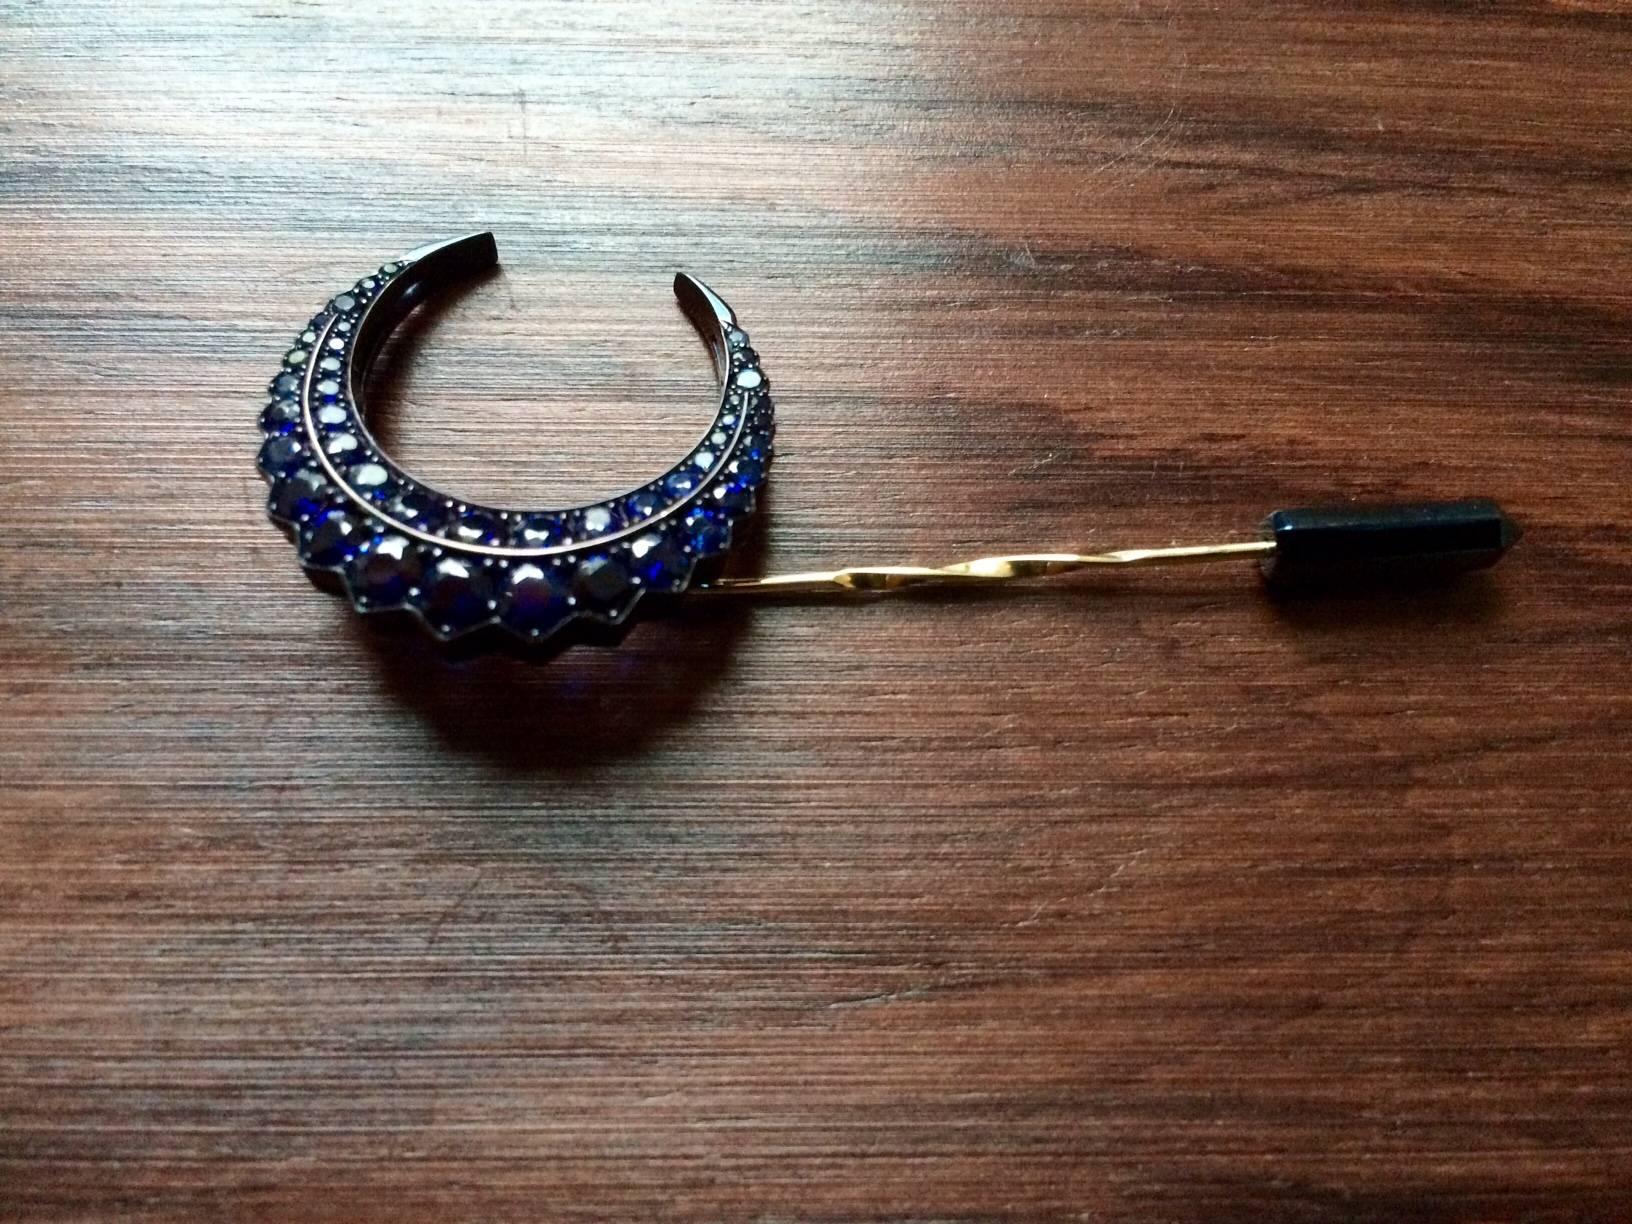 Ana de Costa for Rolls-Royce Gold Sapphire Moon Pin In New Condition For Sale In London, Kent